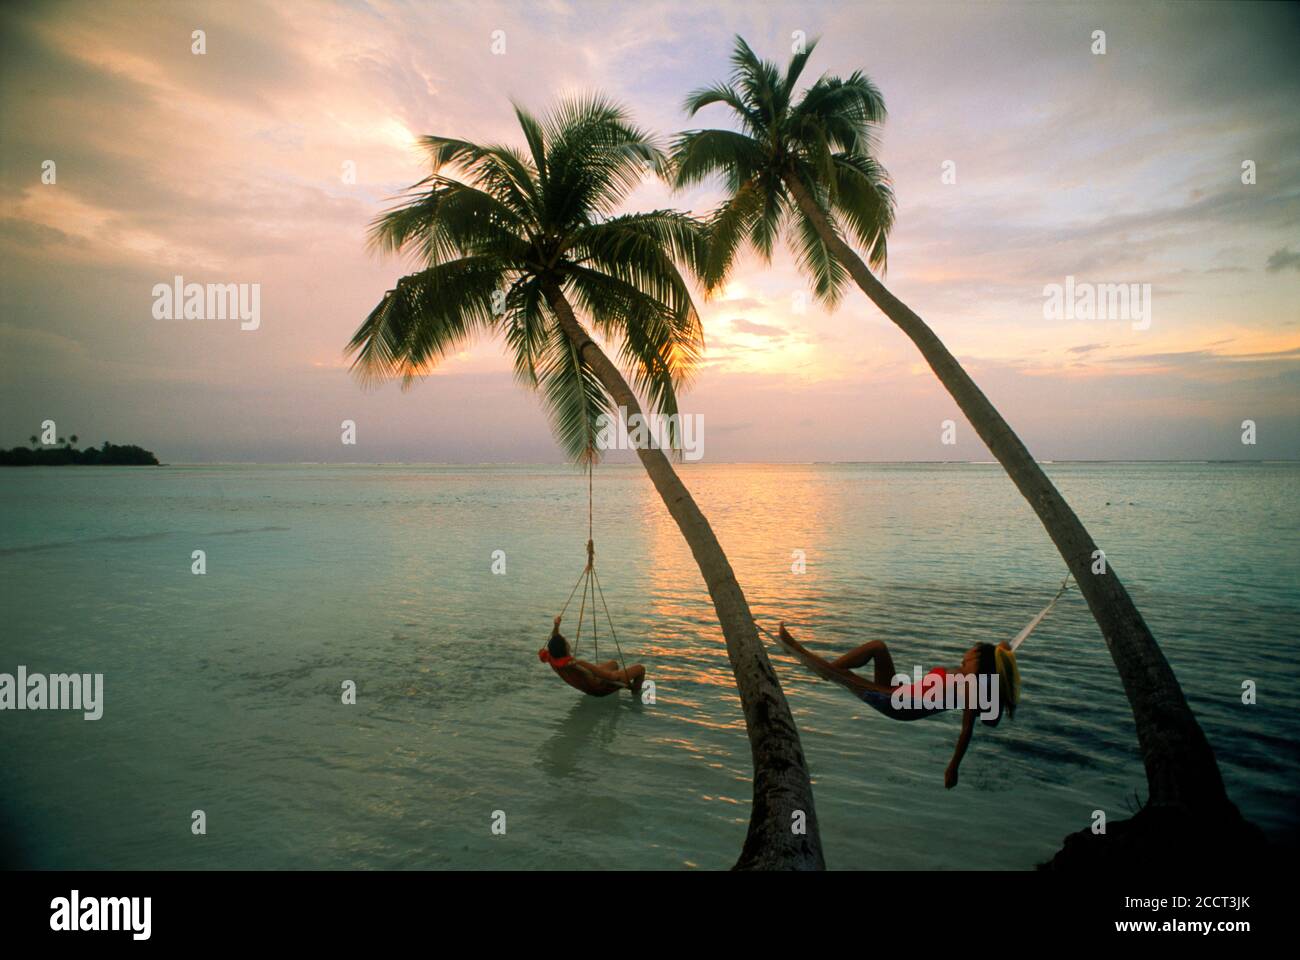 Couple hanging from palm trees over Indian Ocean in the Maldives at sunset Stock Photo